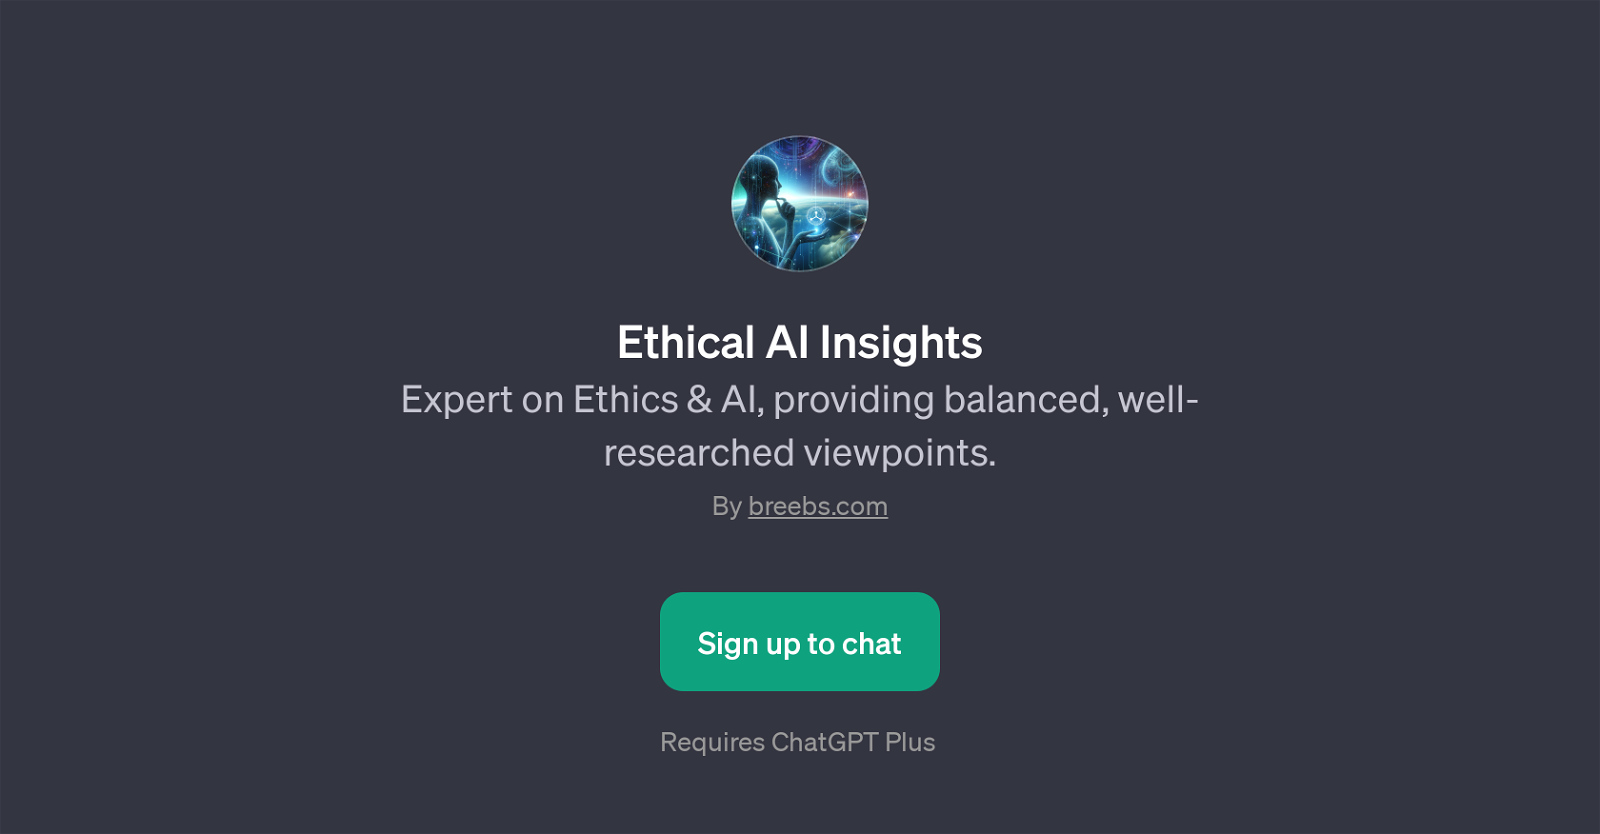 Ethical AI Insights website